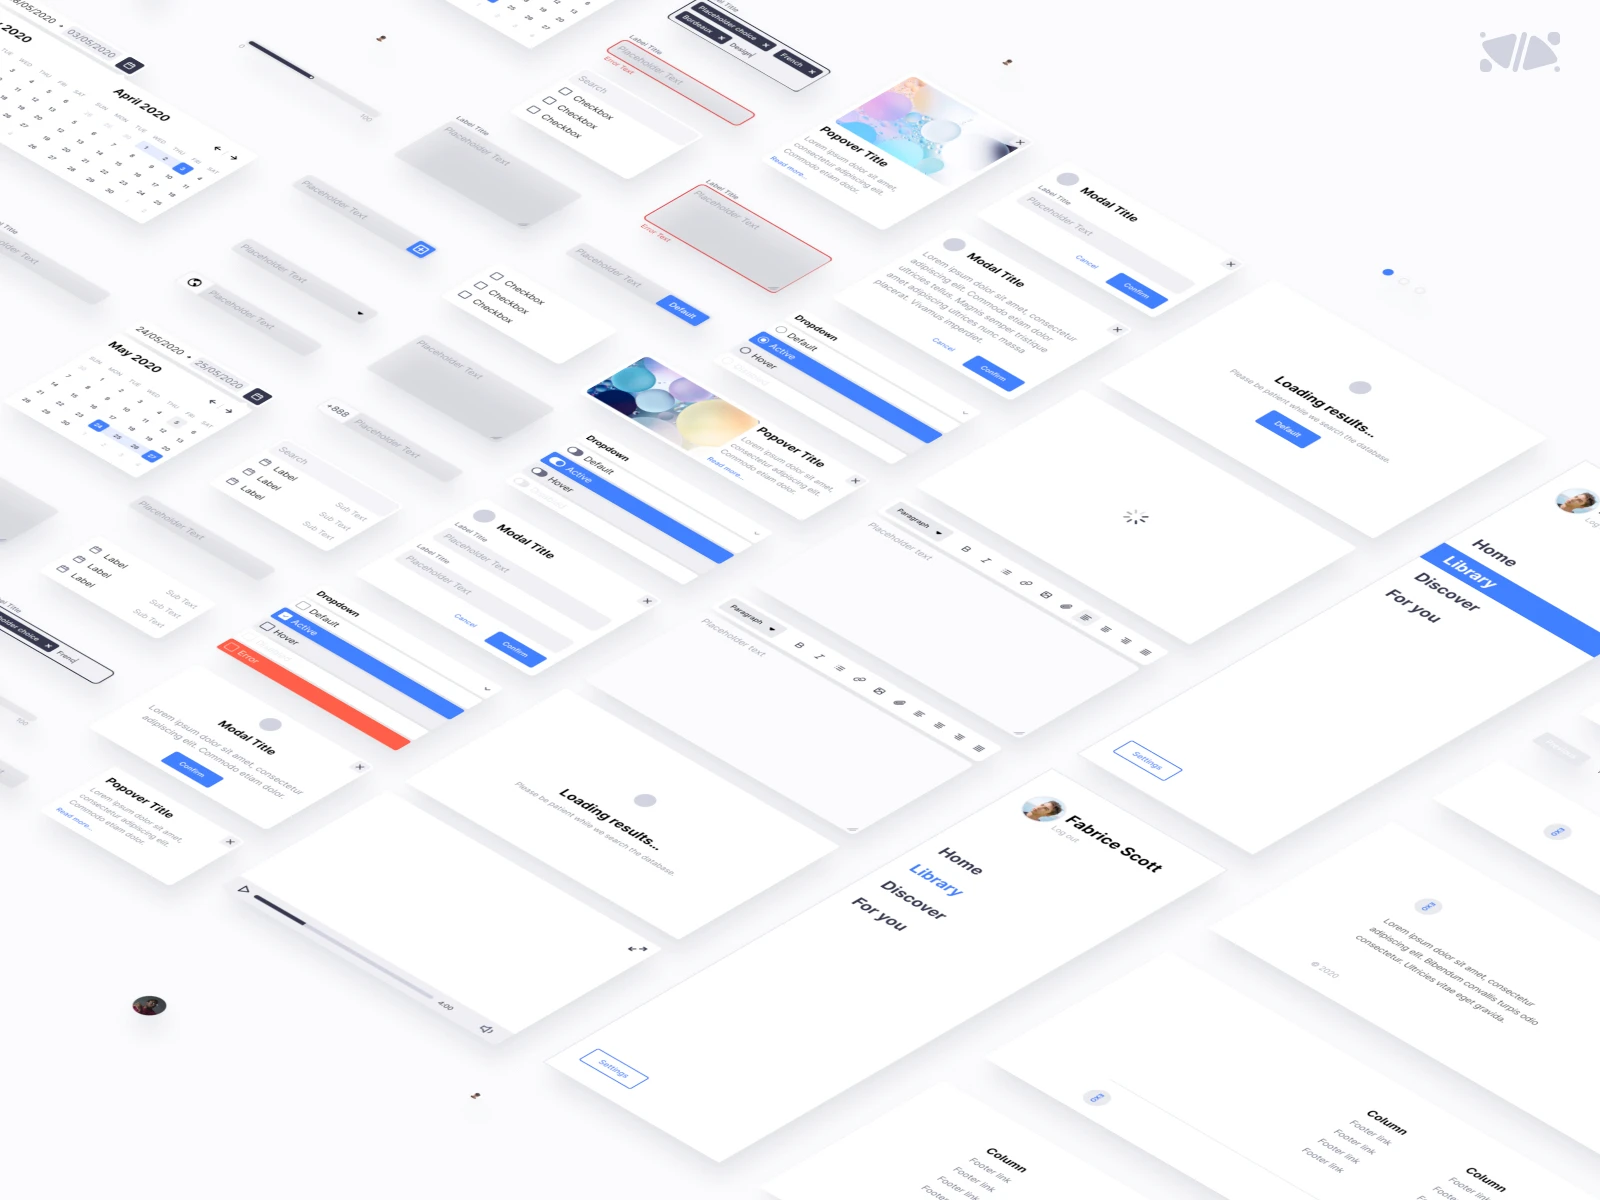 EXO KIT Design System for Figma - EXO KIT is a huge library: typography, colors, buttons, cards, fields... It meets all your needs to create your design system! This UI kit is free for personal project and it works with Figma.